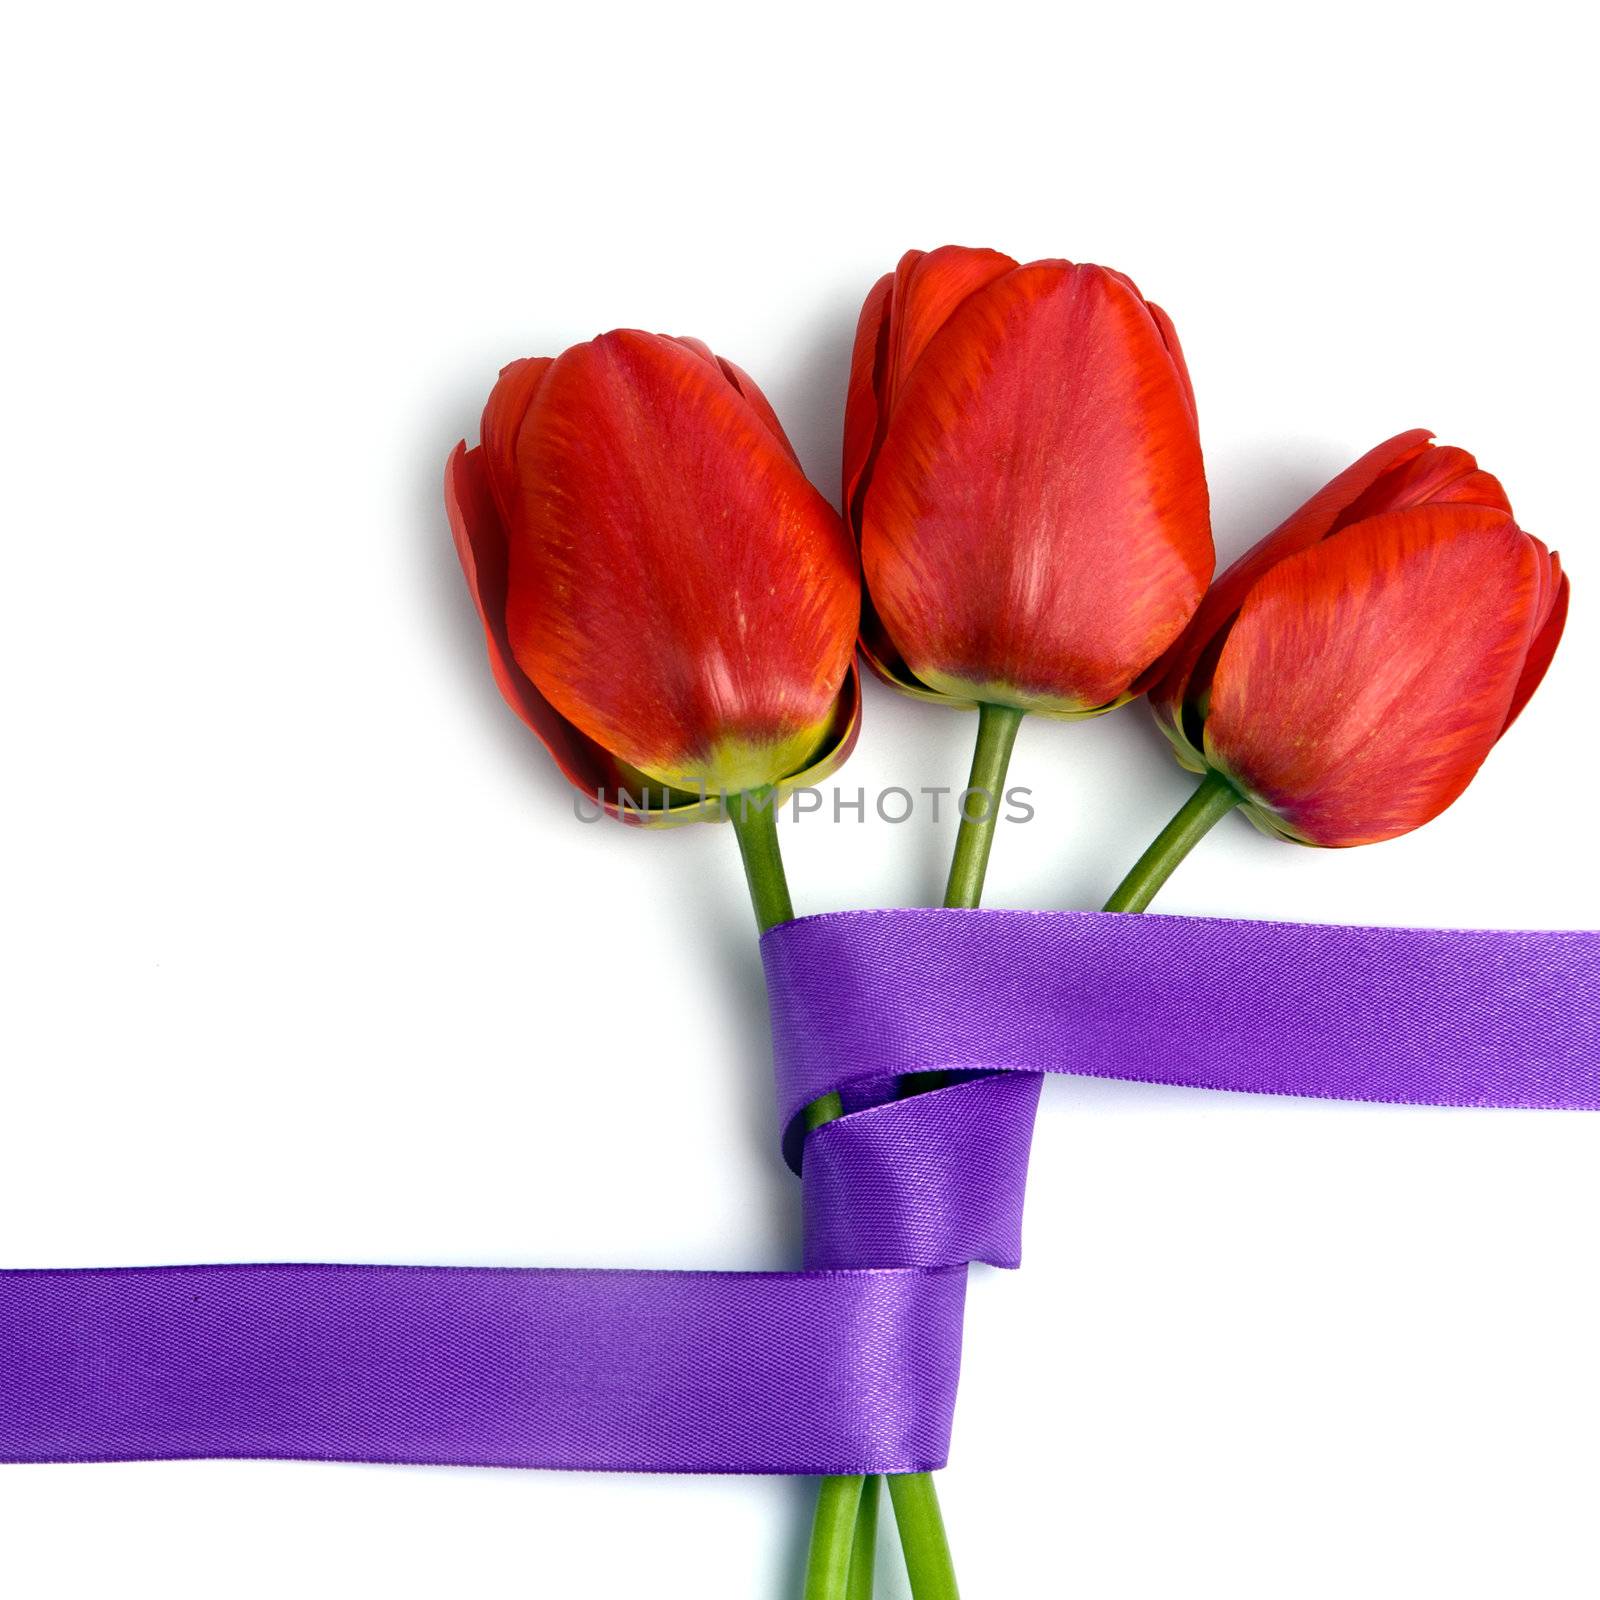 An image of three red tulips with violet ribbon